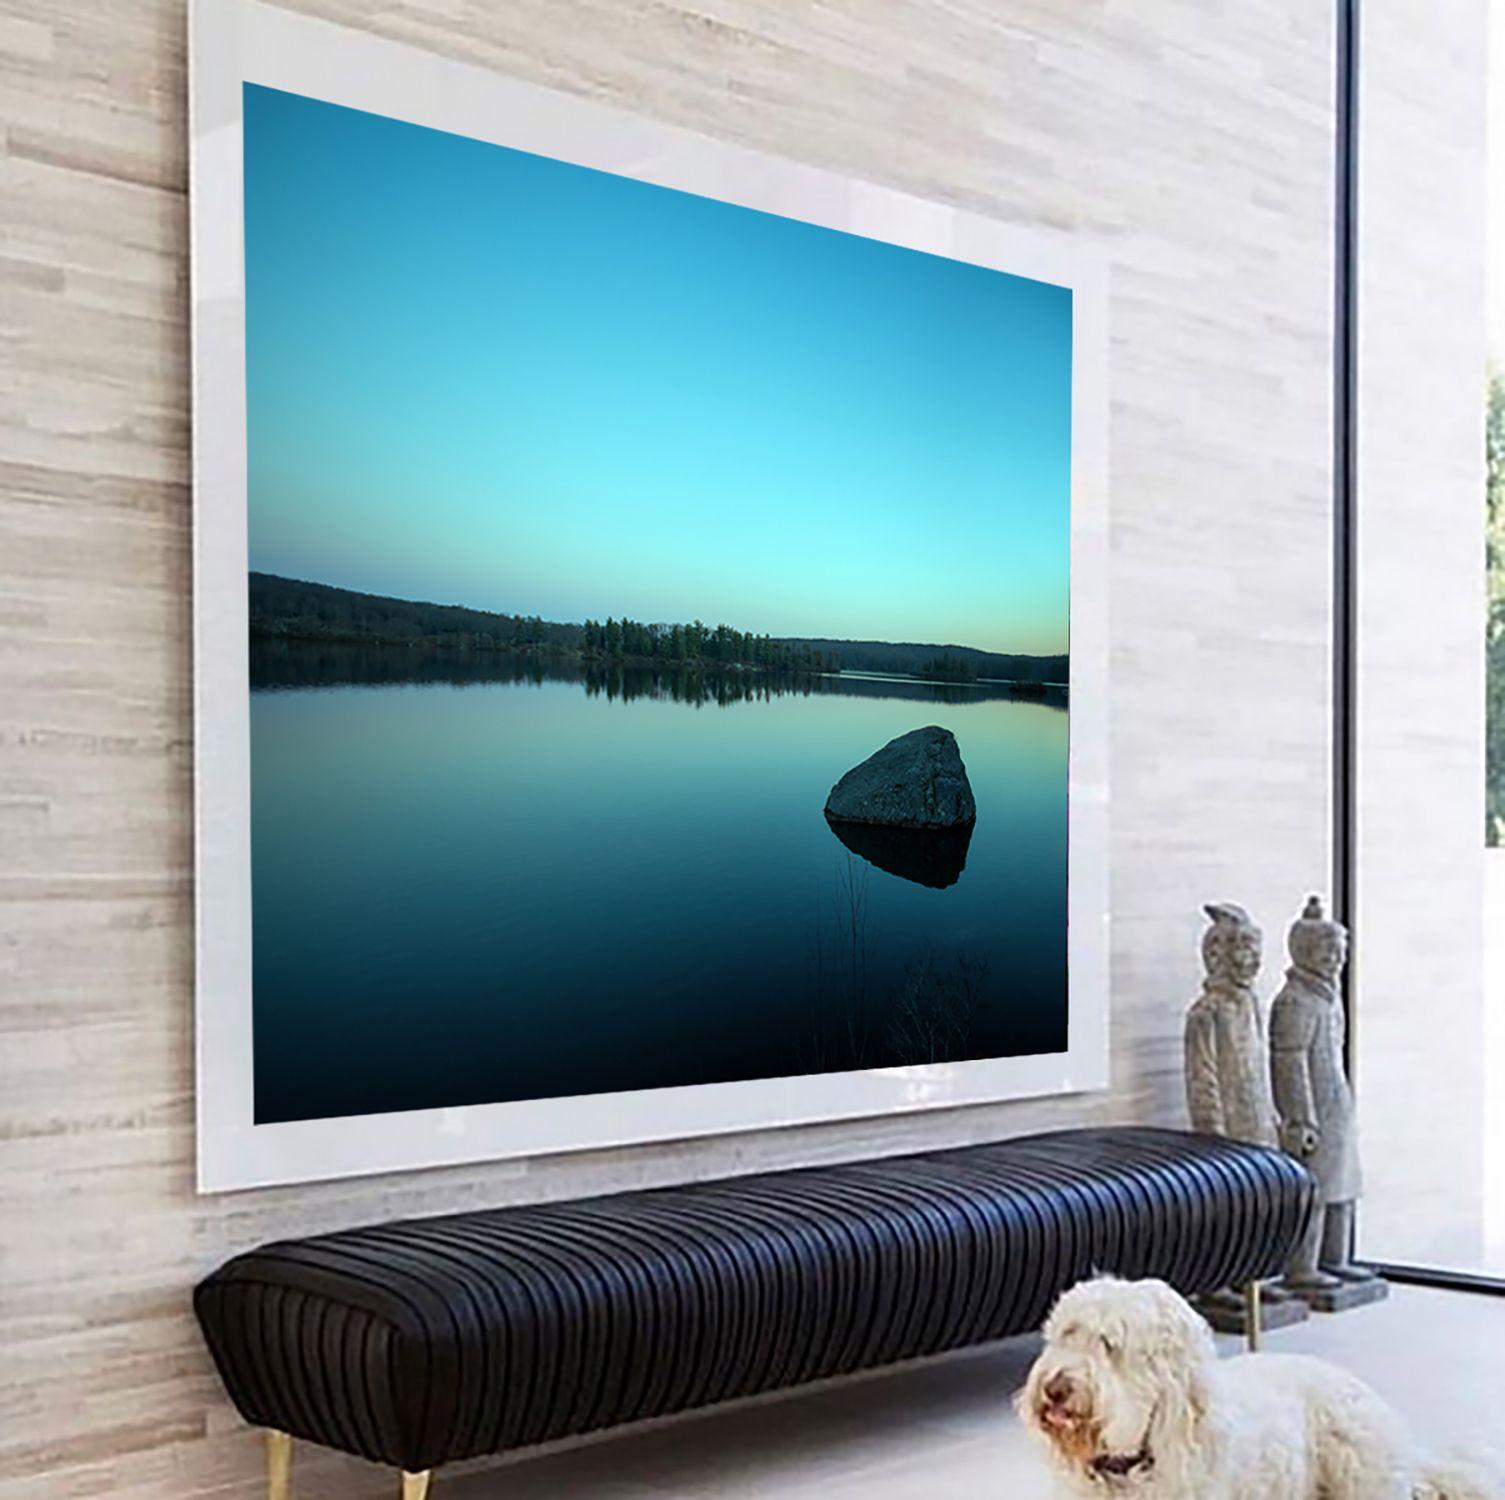 Color landscape photograph of a lake in Harriman State Park, NY.  Printed on Archival Fine Art Paper. :: Photograph :: Color :: This piece comes with an official certificate of authenticity signed by the artist :: Ready to Hang: No :: Signed: Yes ::